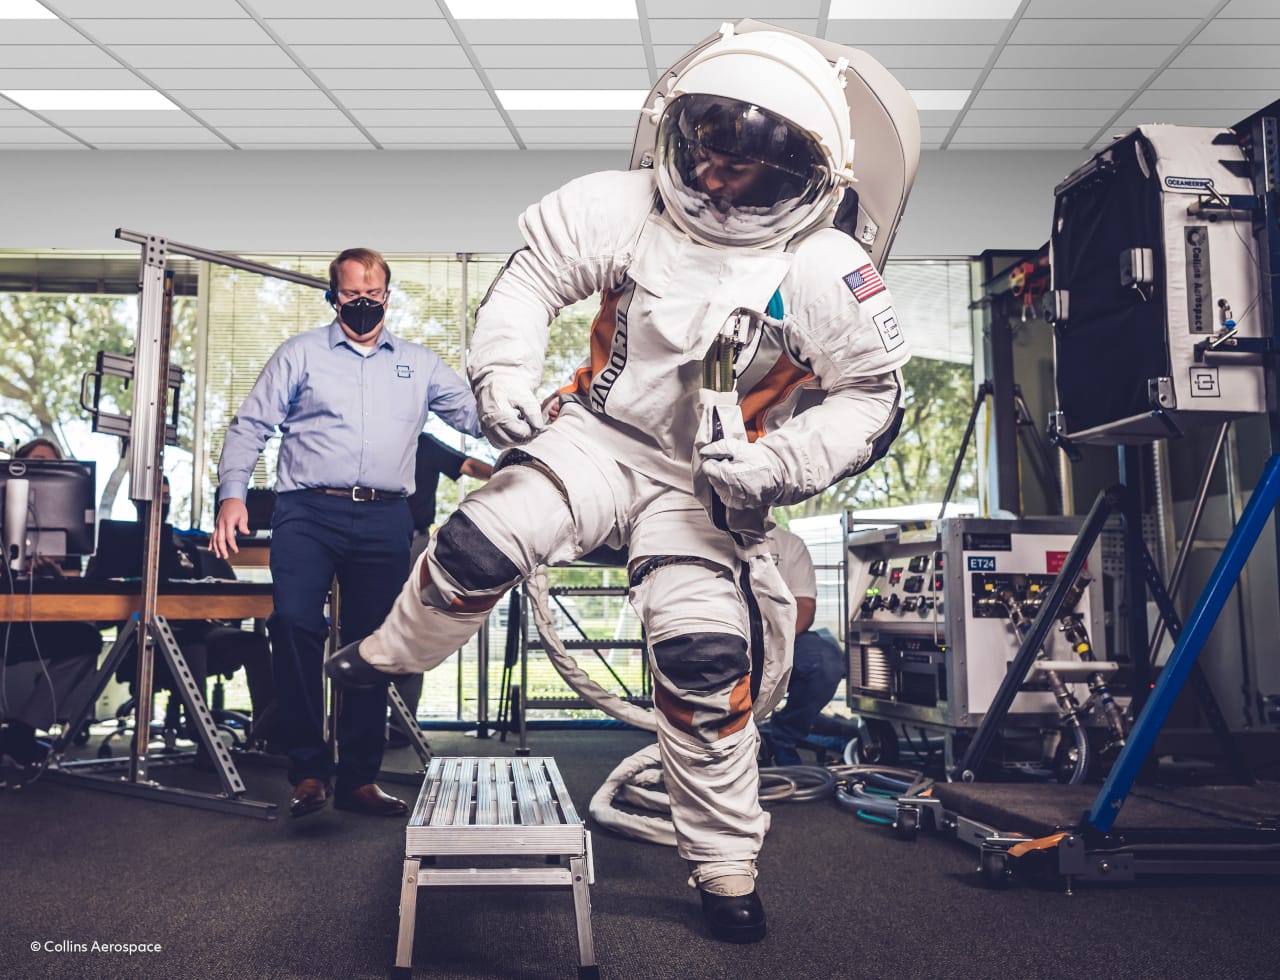 Collins Aerospace's spacesuit during a demonstration in September 2021. ©Collins Aerospace